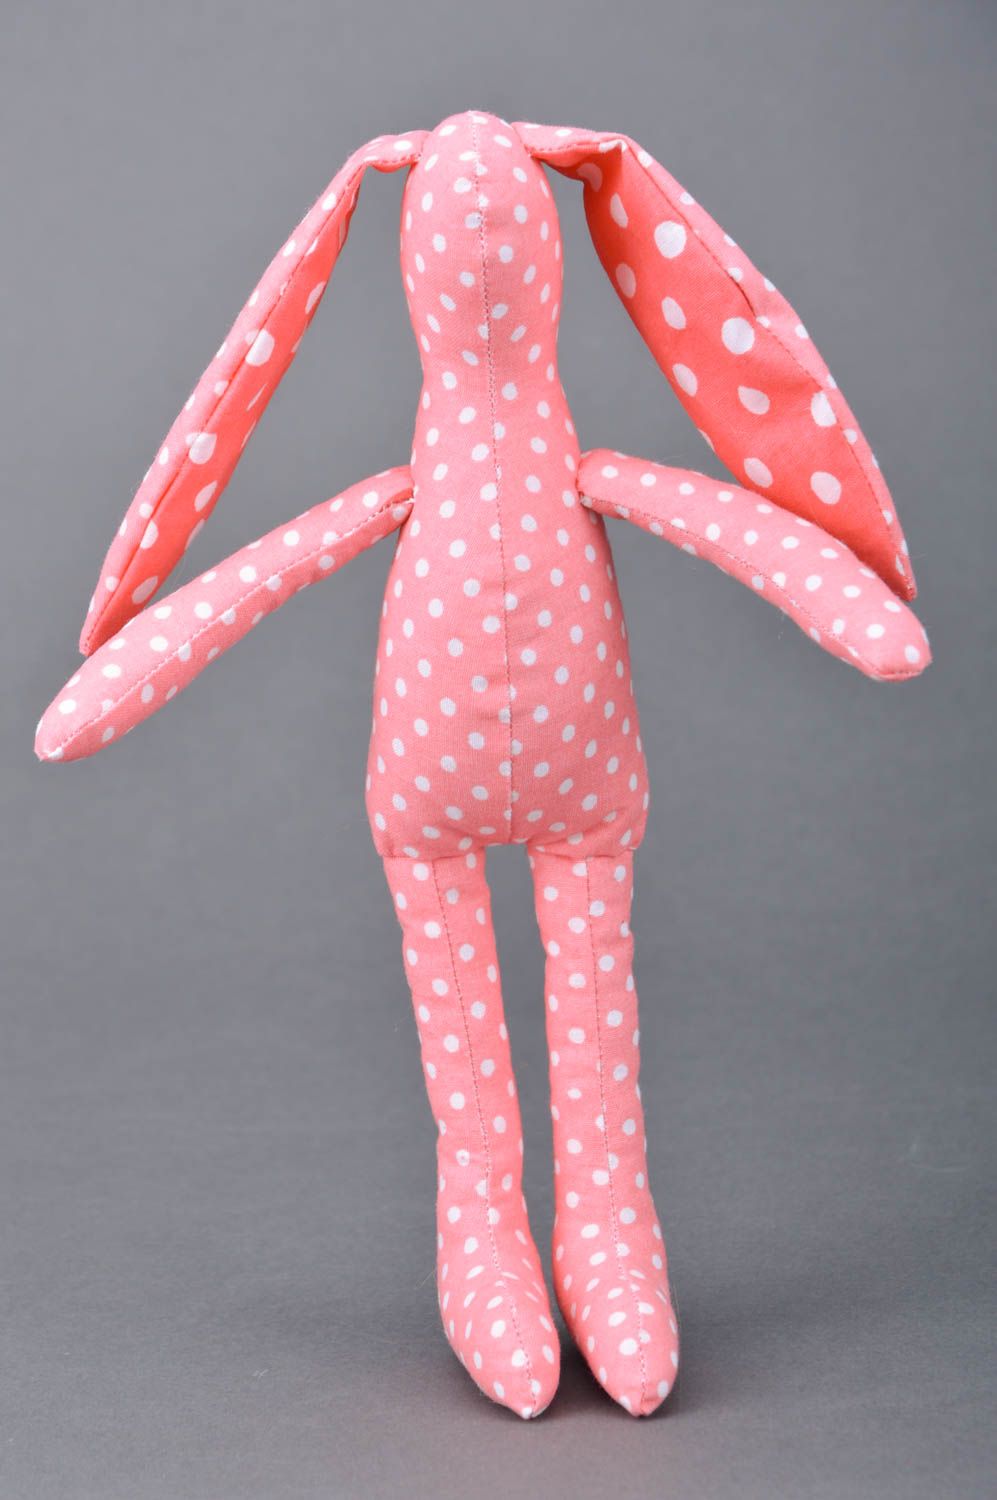 Handmade decorative pink soft toy cotton bunny with polka dot pattern home decor photo 5